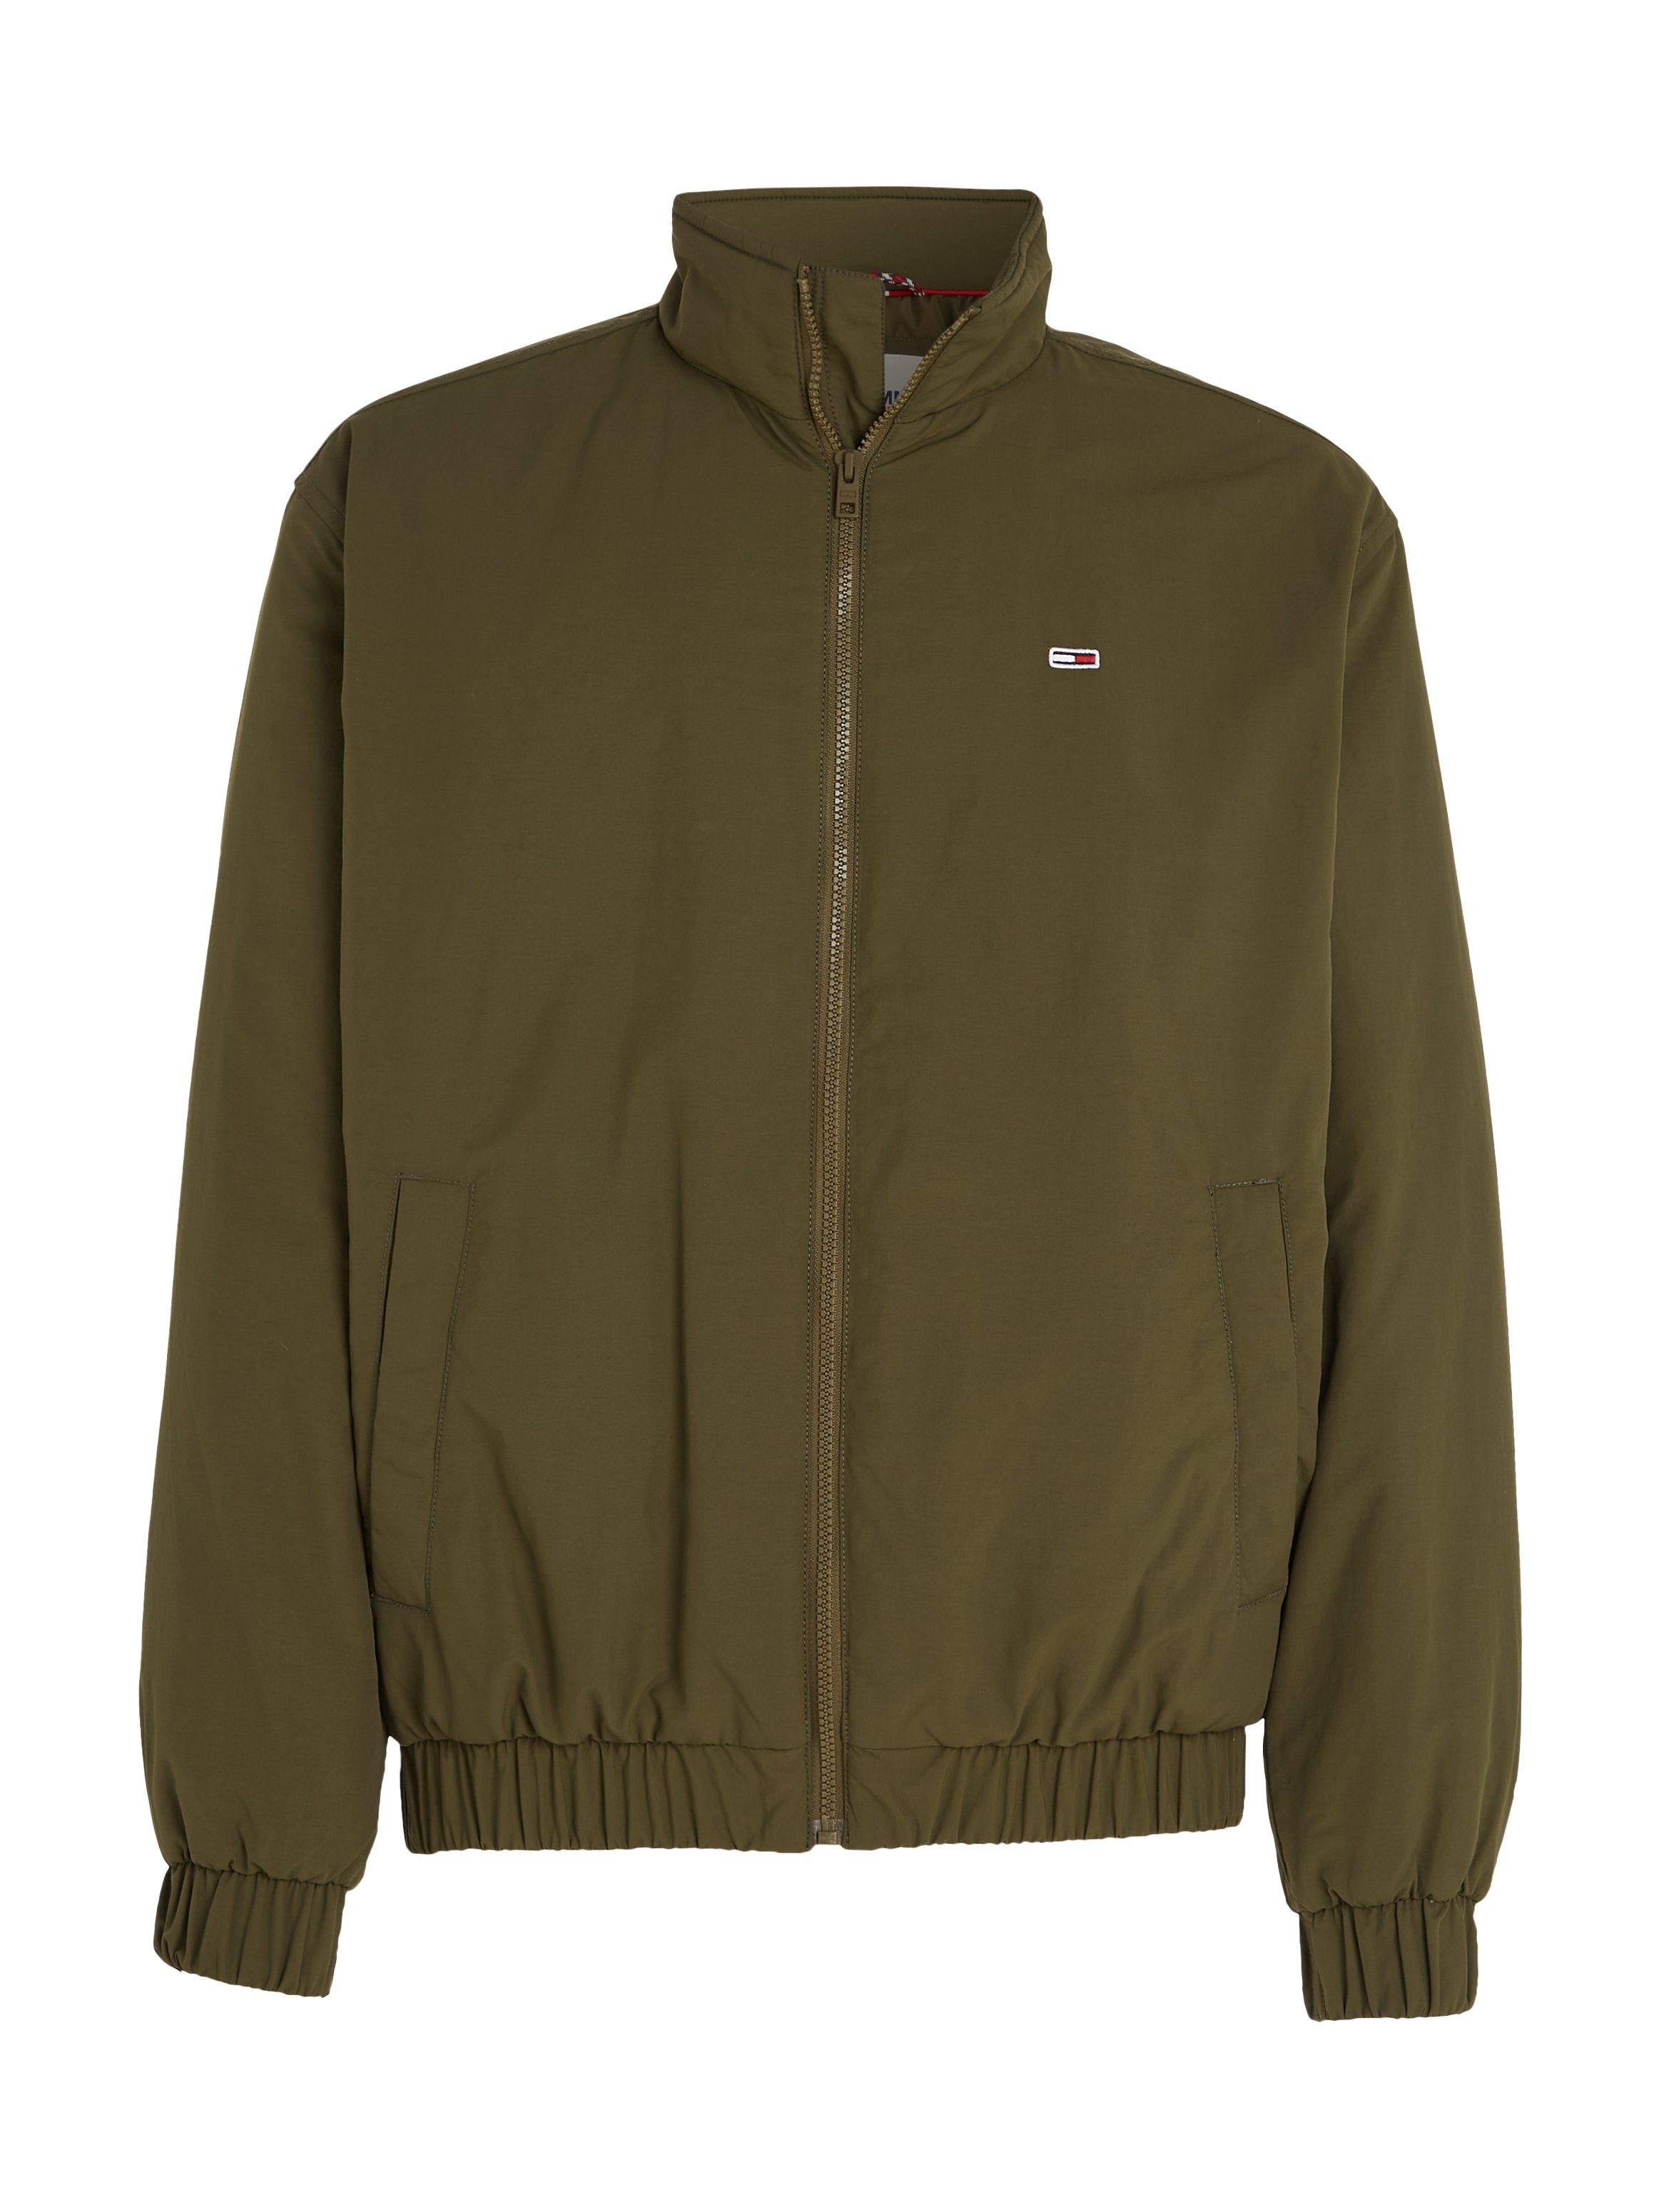 Tommy Jeans Blouson TJM ESSENTIAL PADDED Green Olive JACKET Drab